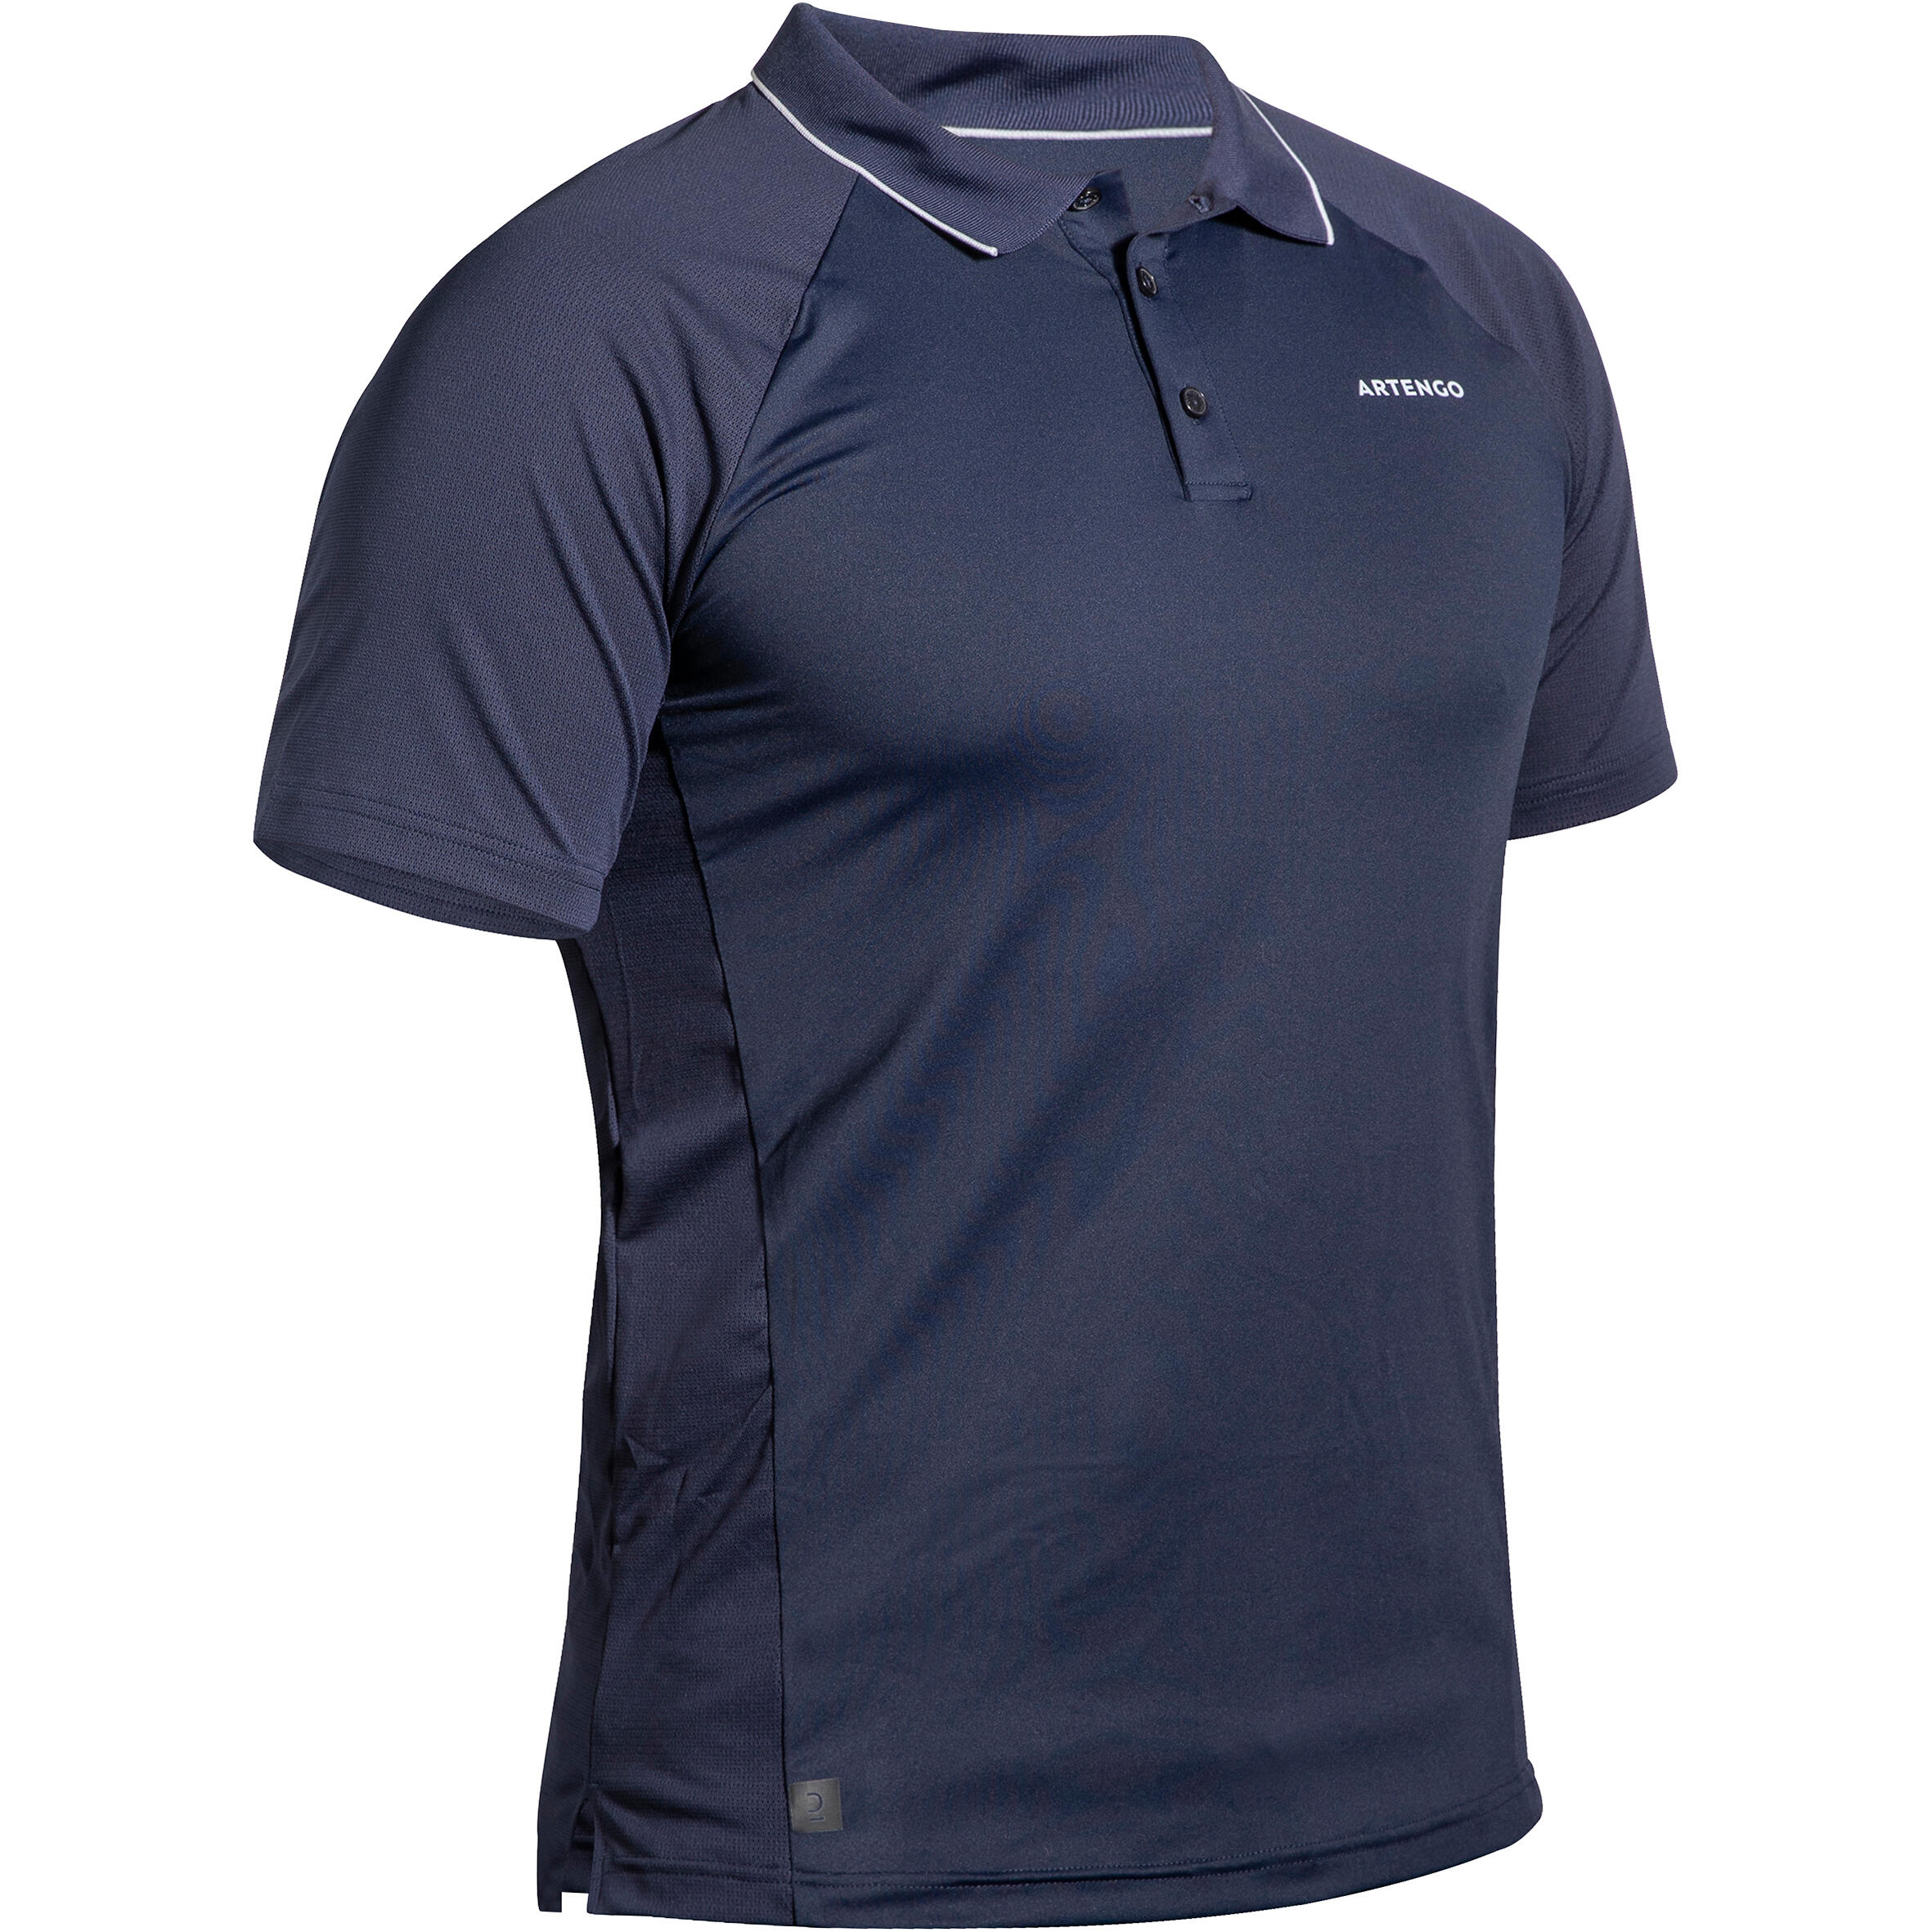 Decathlon Tennis Shoes and Clothing